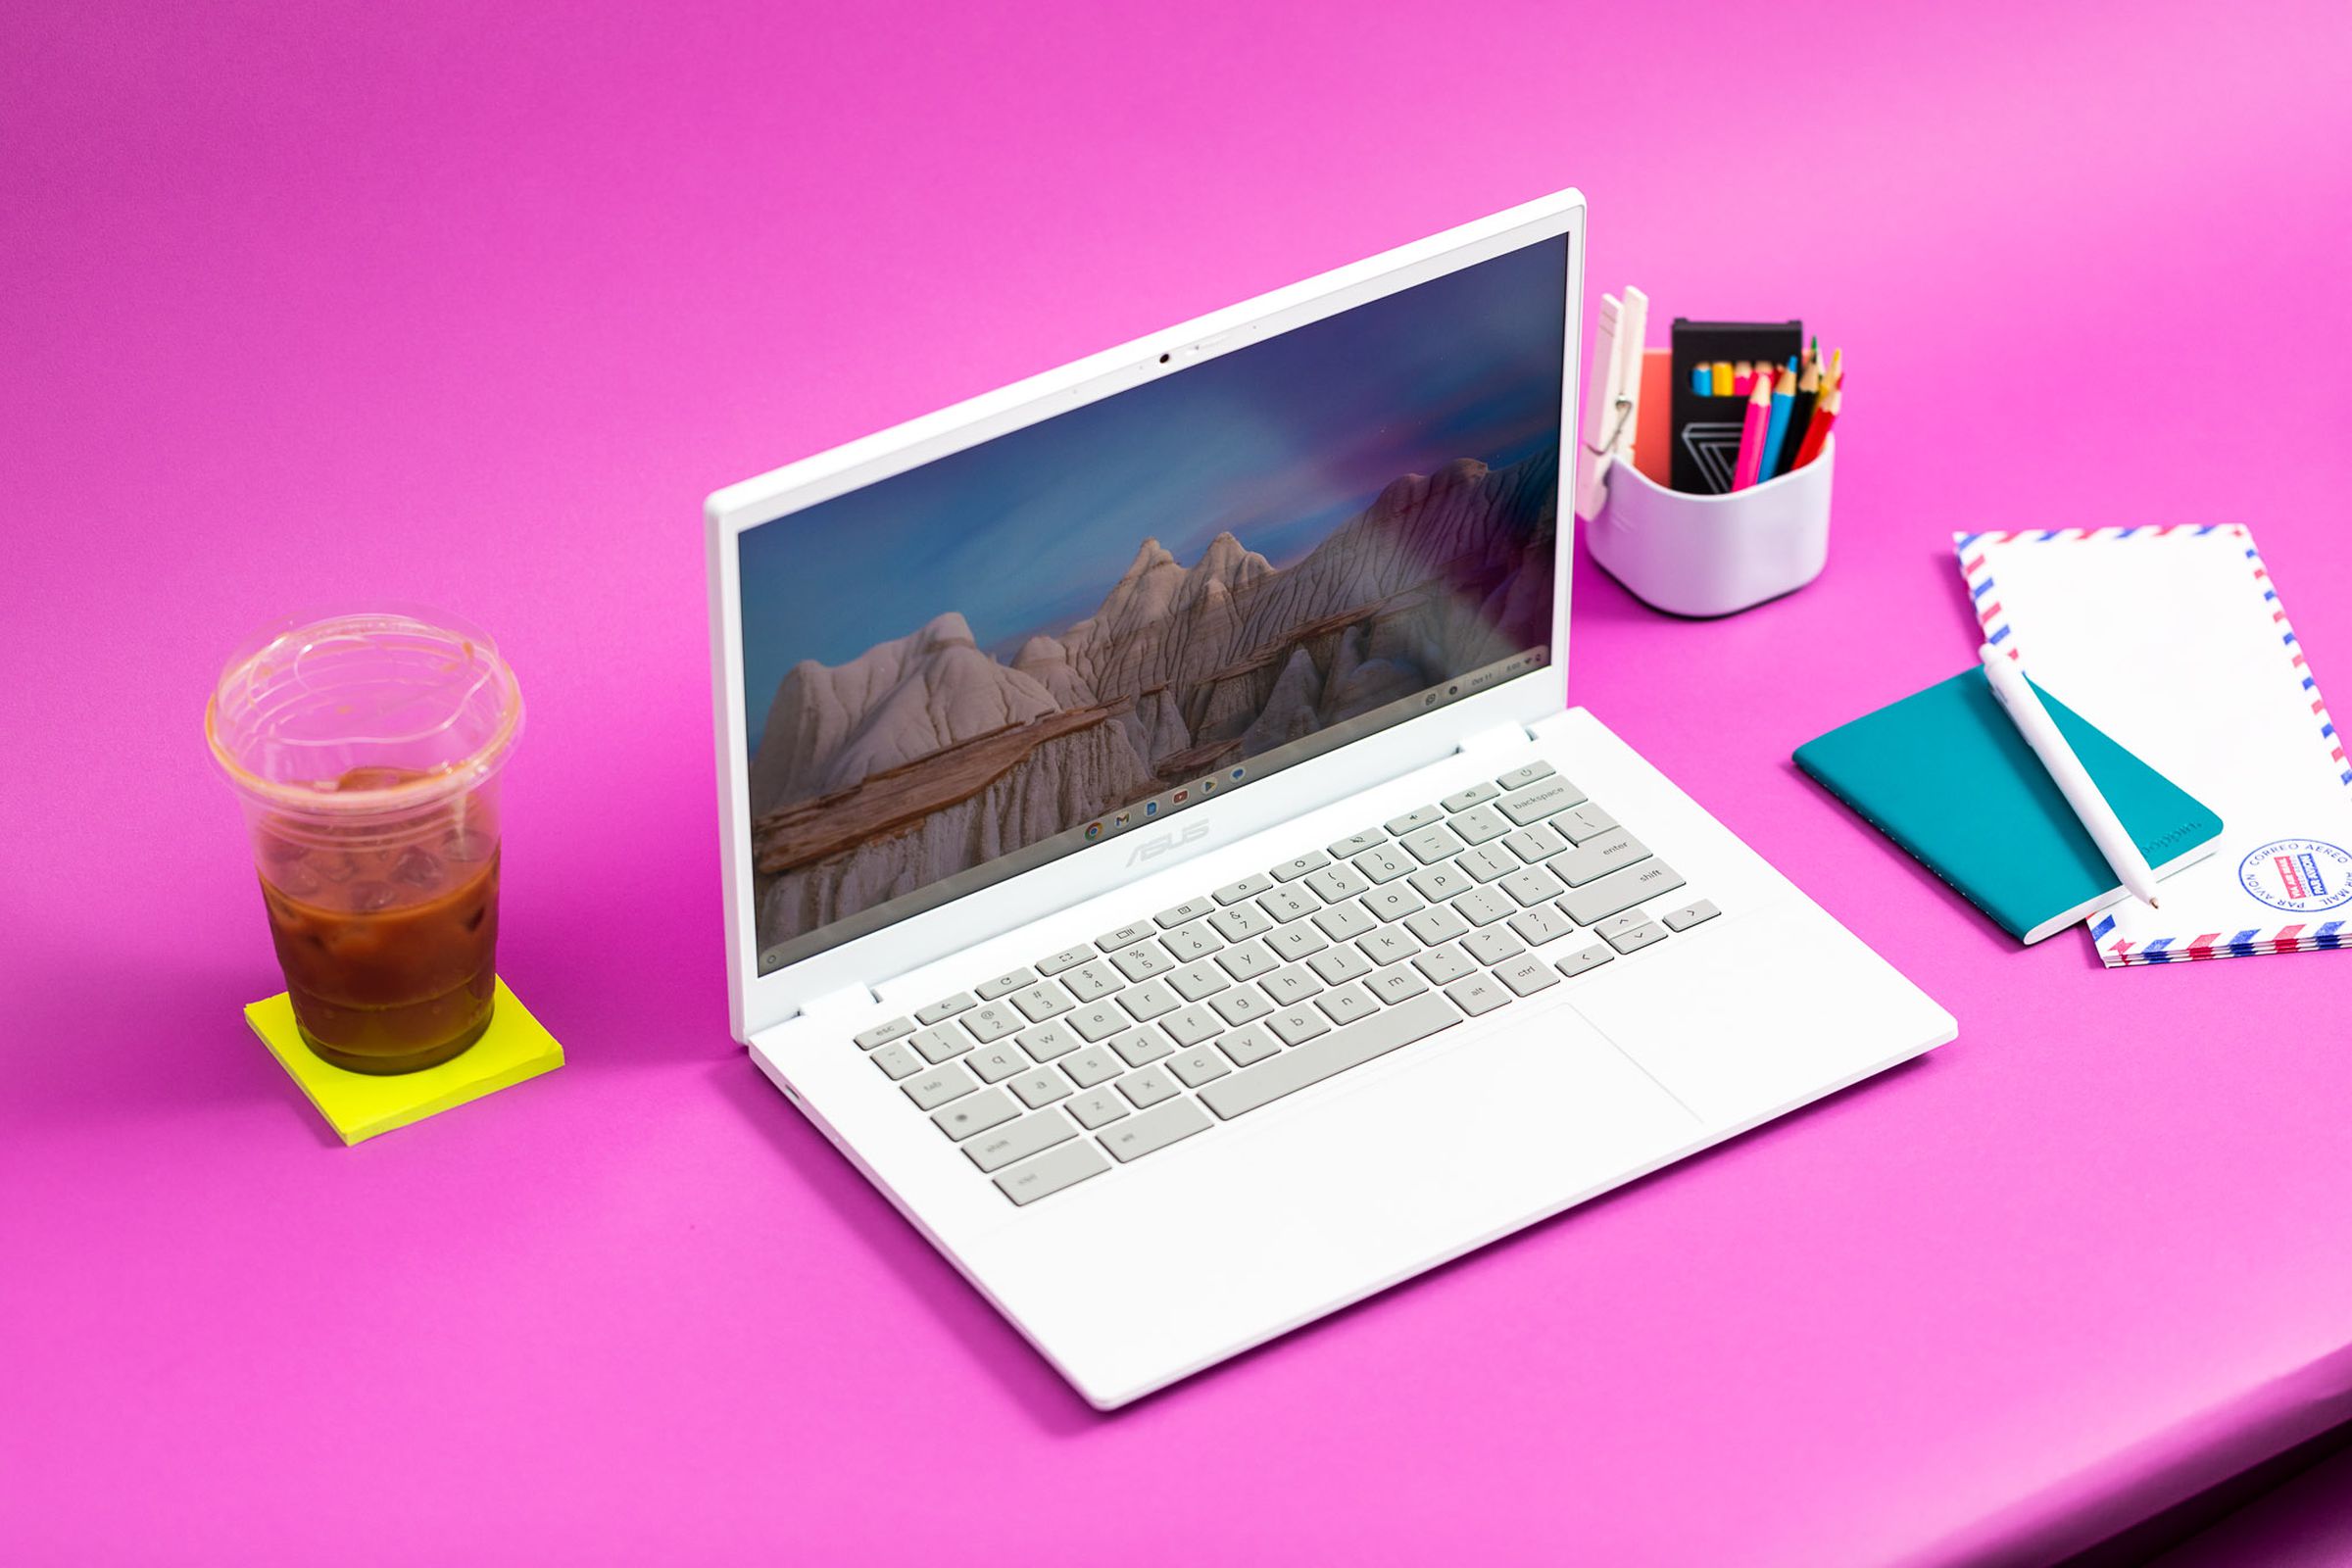 The Asus Chromebook Plus CX34 on a pink table with a coffee and post-it pad beside it.